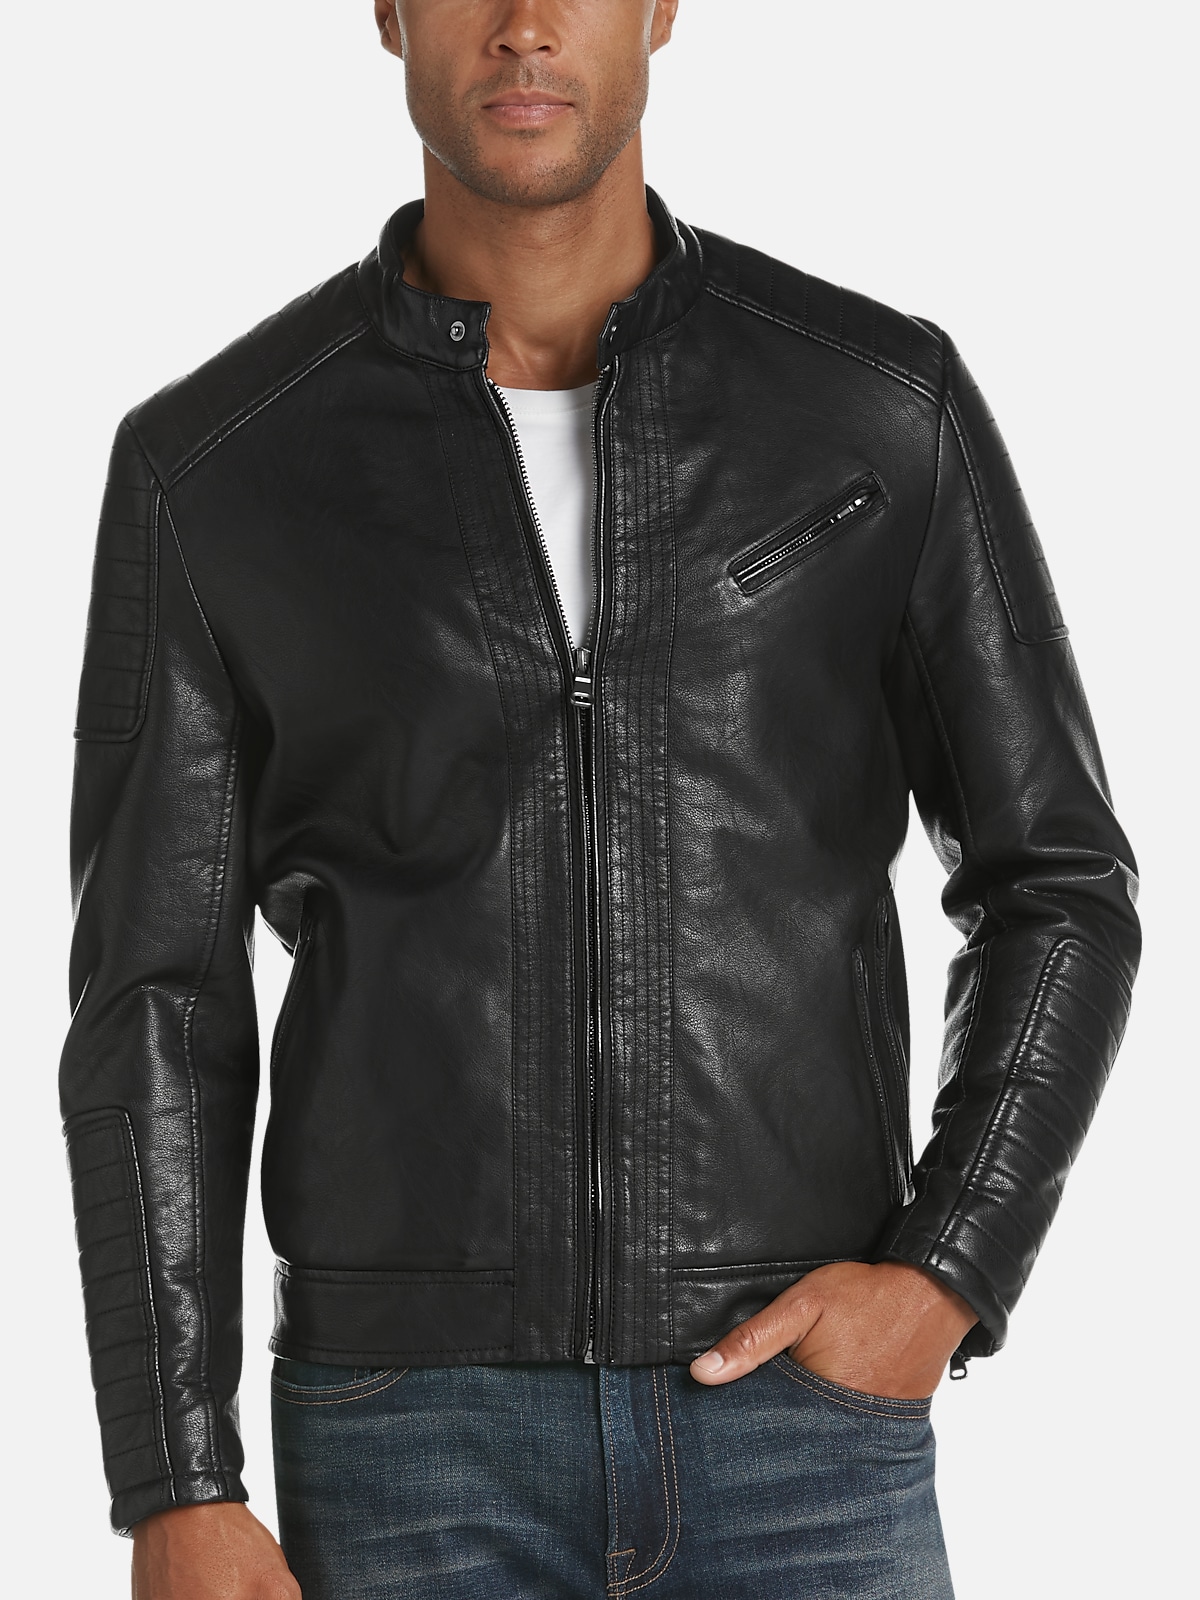 Pronto Uomo Modern Fit Faux Leather Moto Jacket | All Clearance $39.99 ...